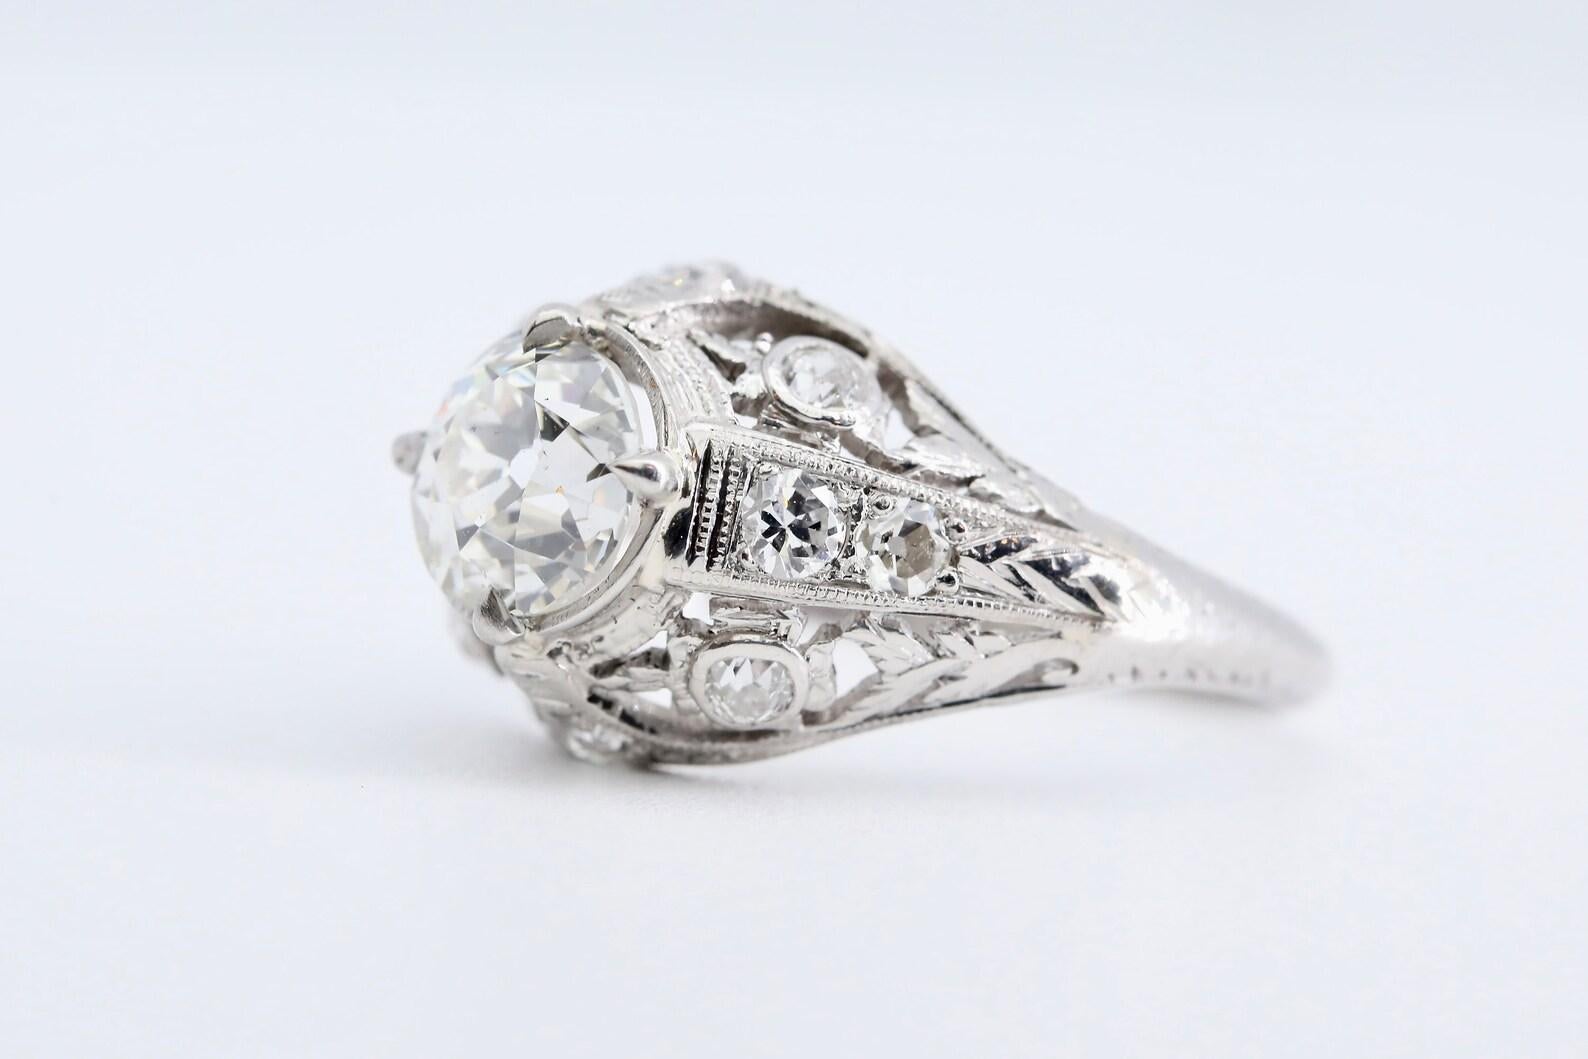 An Art Deco period floral motif diamond engagement ring crafted in platinum.

Centered by a 1.05 carat H color SI1 clarity old European cut diamond. 

Accented by hand engraved flowers, pierced filigree work, and a further 10 European cut diamonds